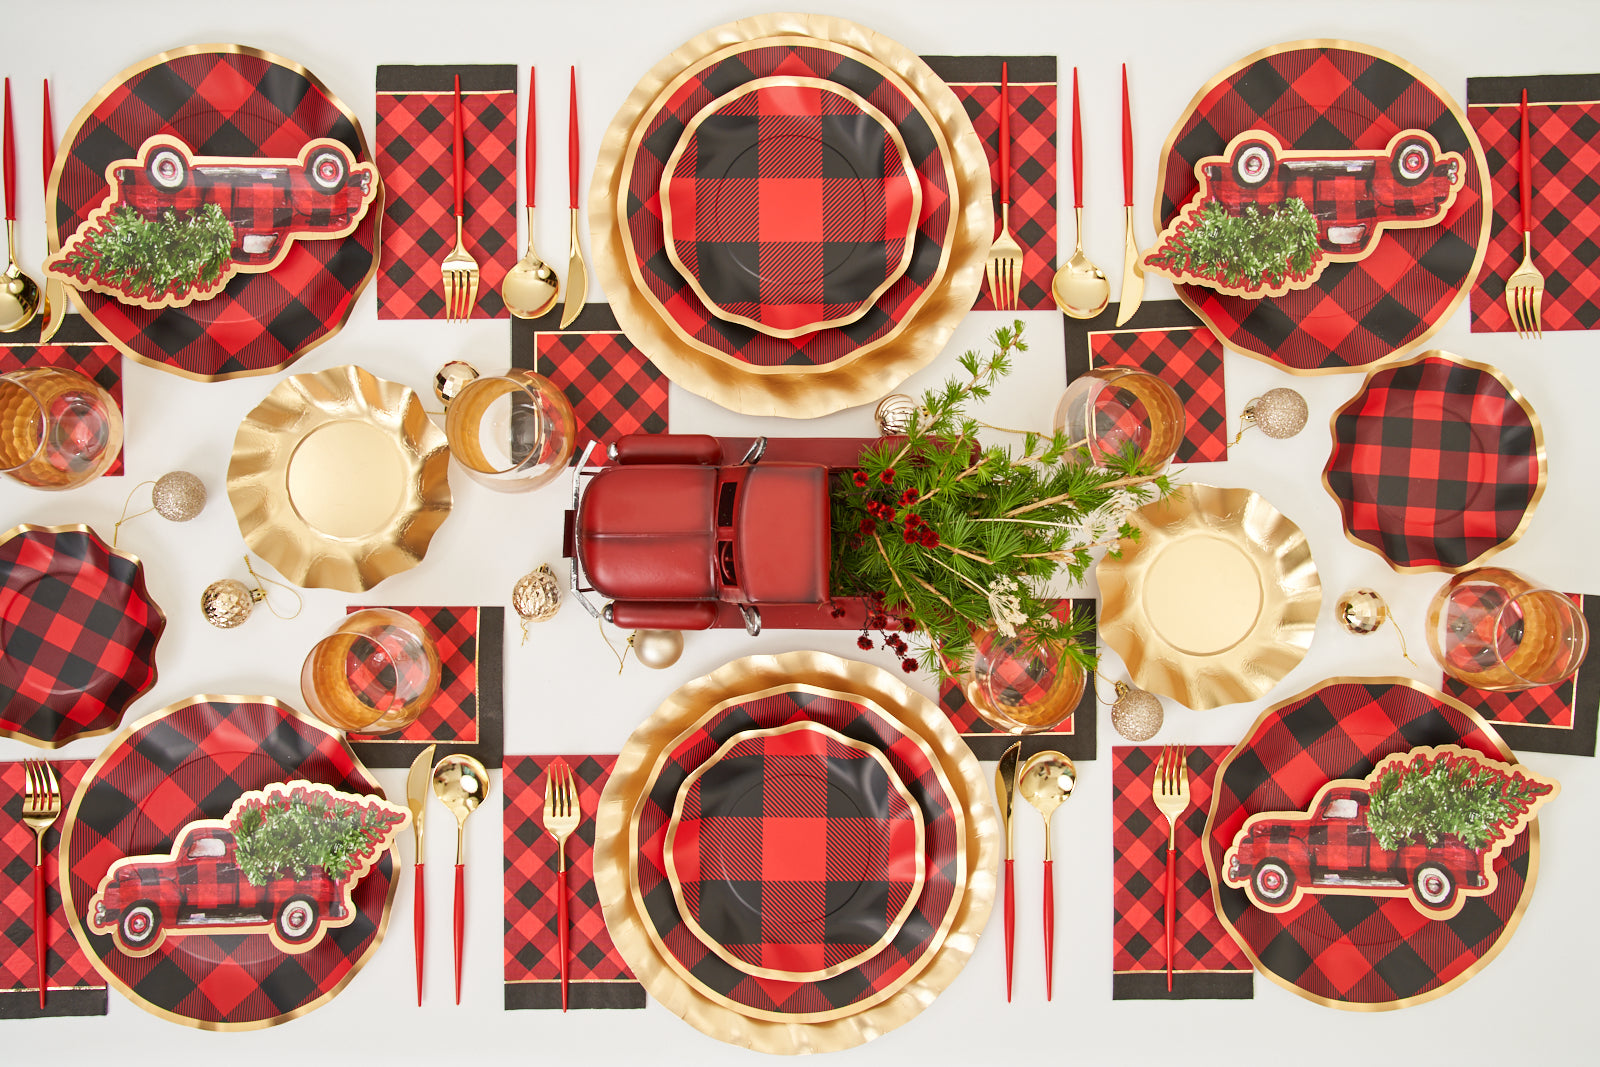 Top 6 Disposable Christmas Plates Designs for the Holidays